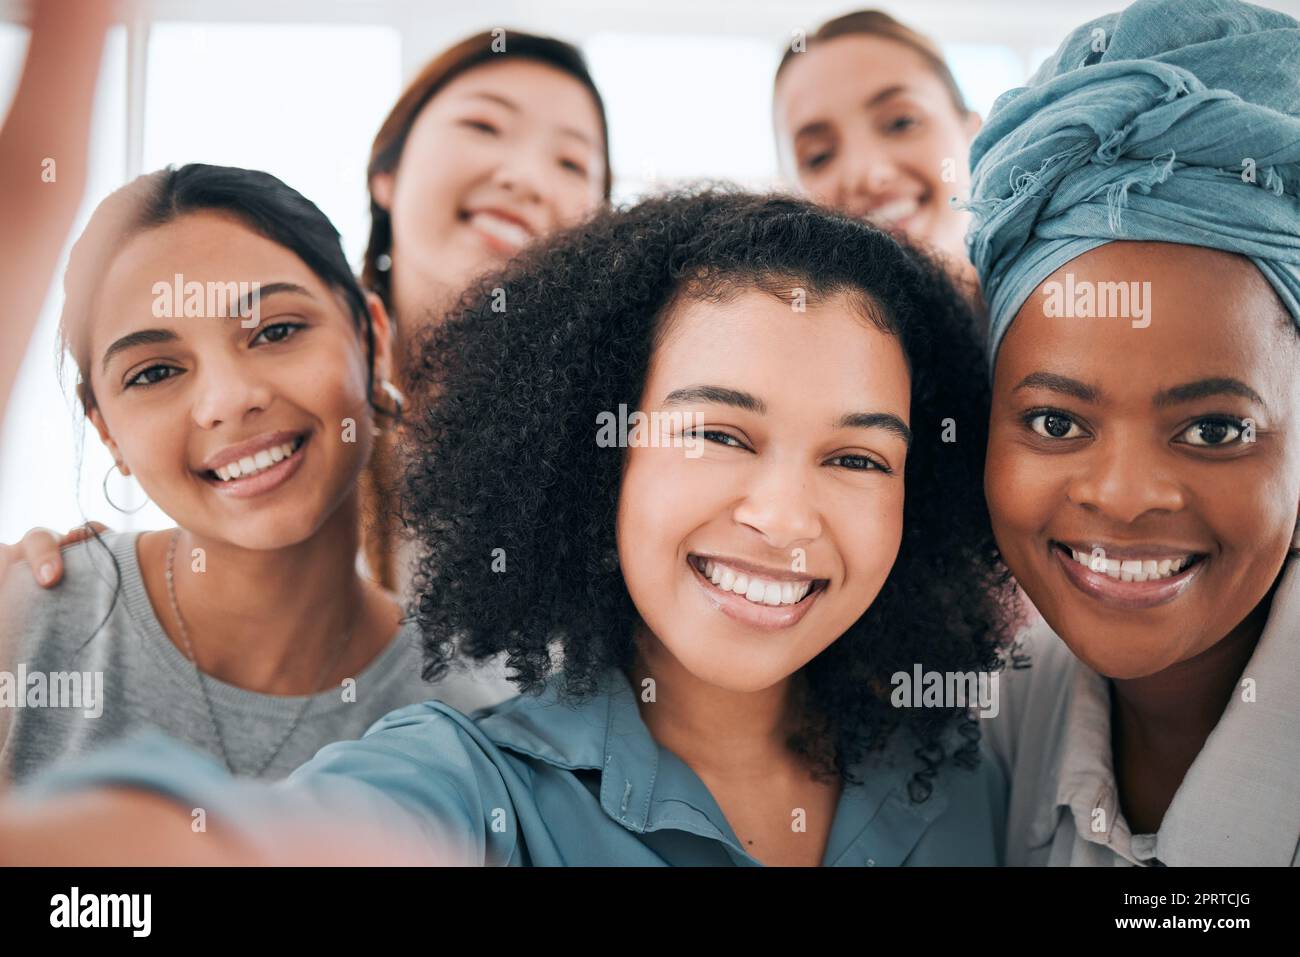 Teamwork selfie, business women and fun creative people for social media, contact us or about us company website. Portrait, happy smile or office diversity friends for global empowerment photograph Stock Photo